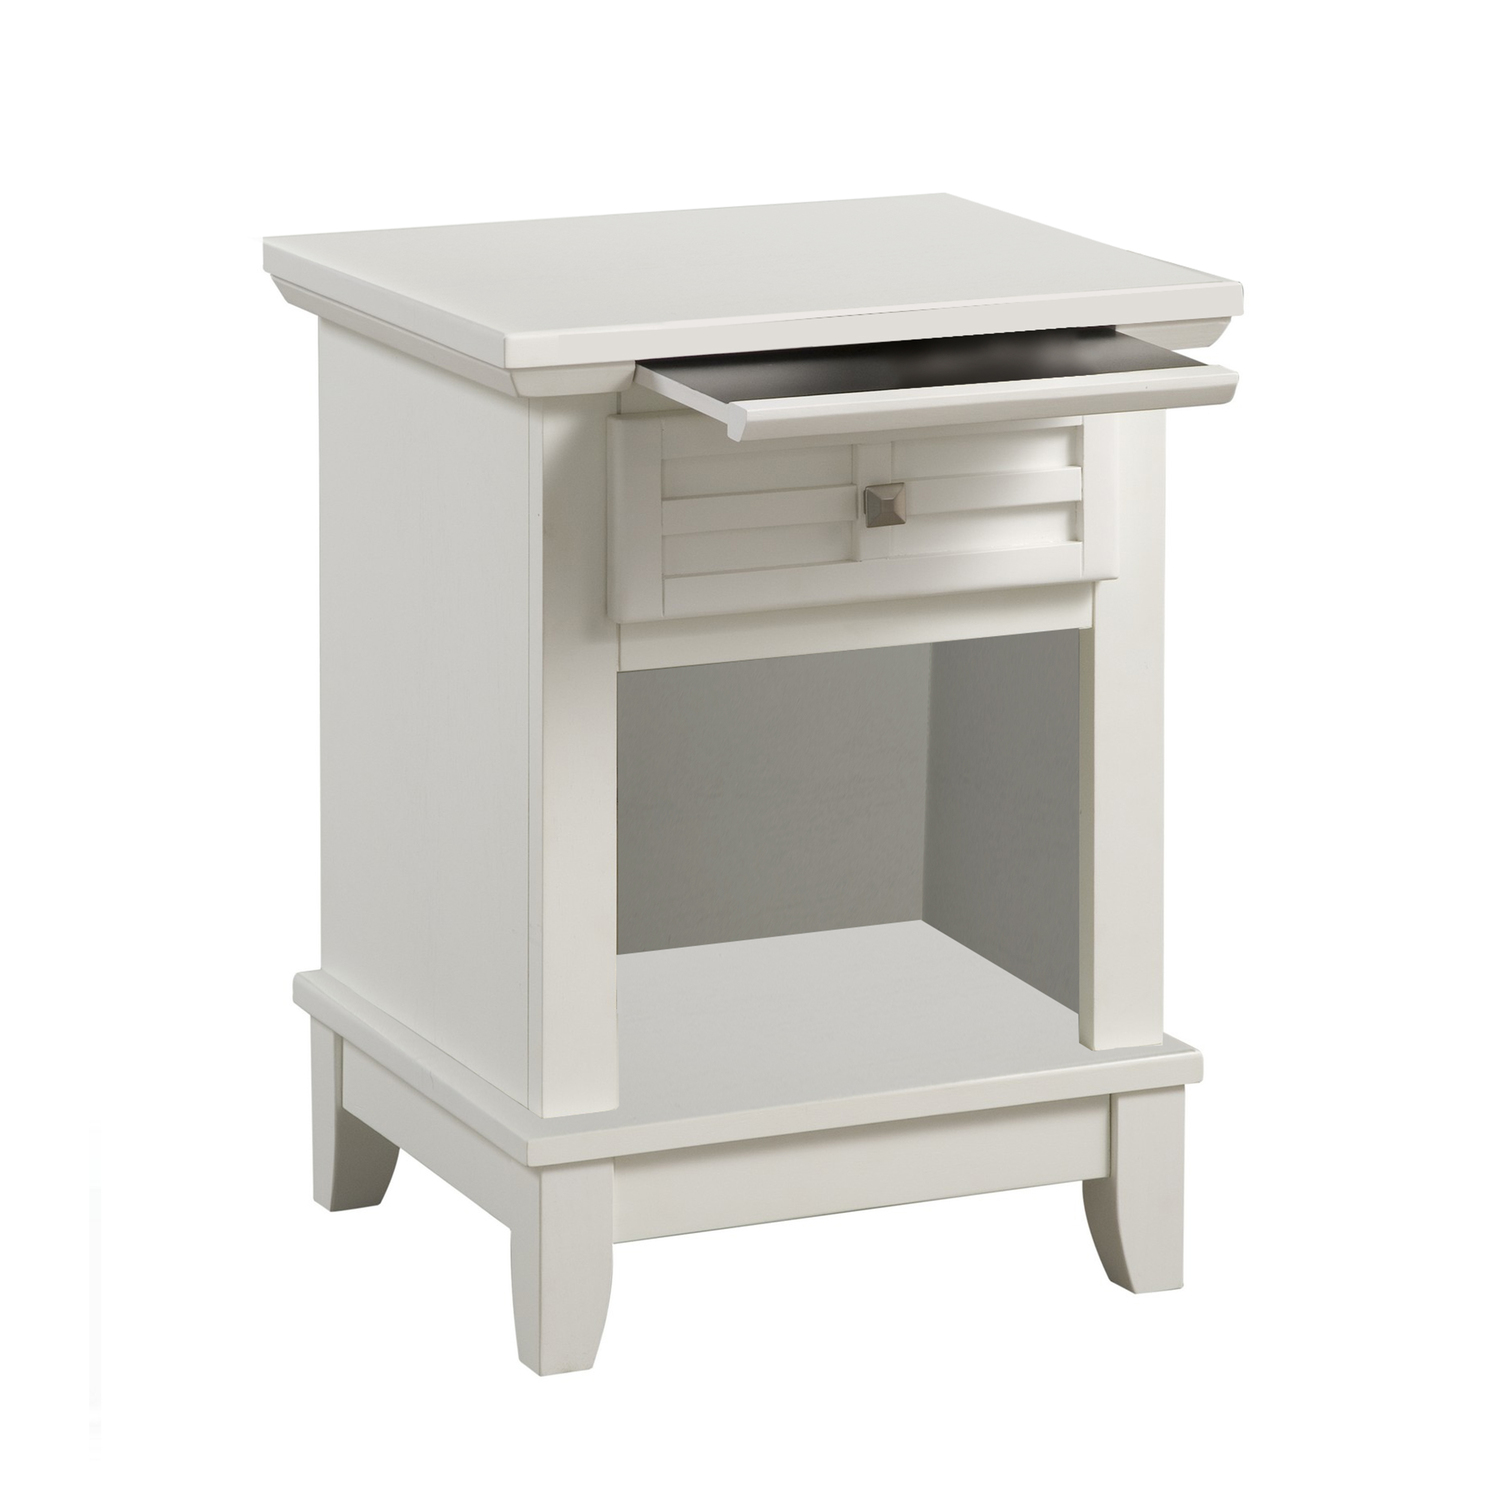 Homestyles Arts & Crafts Off White Wood Nightstand with Slide-out Shelf - image 1 of 3